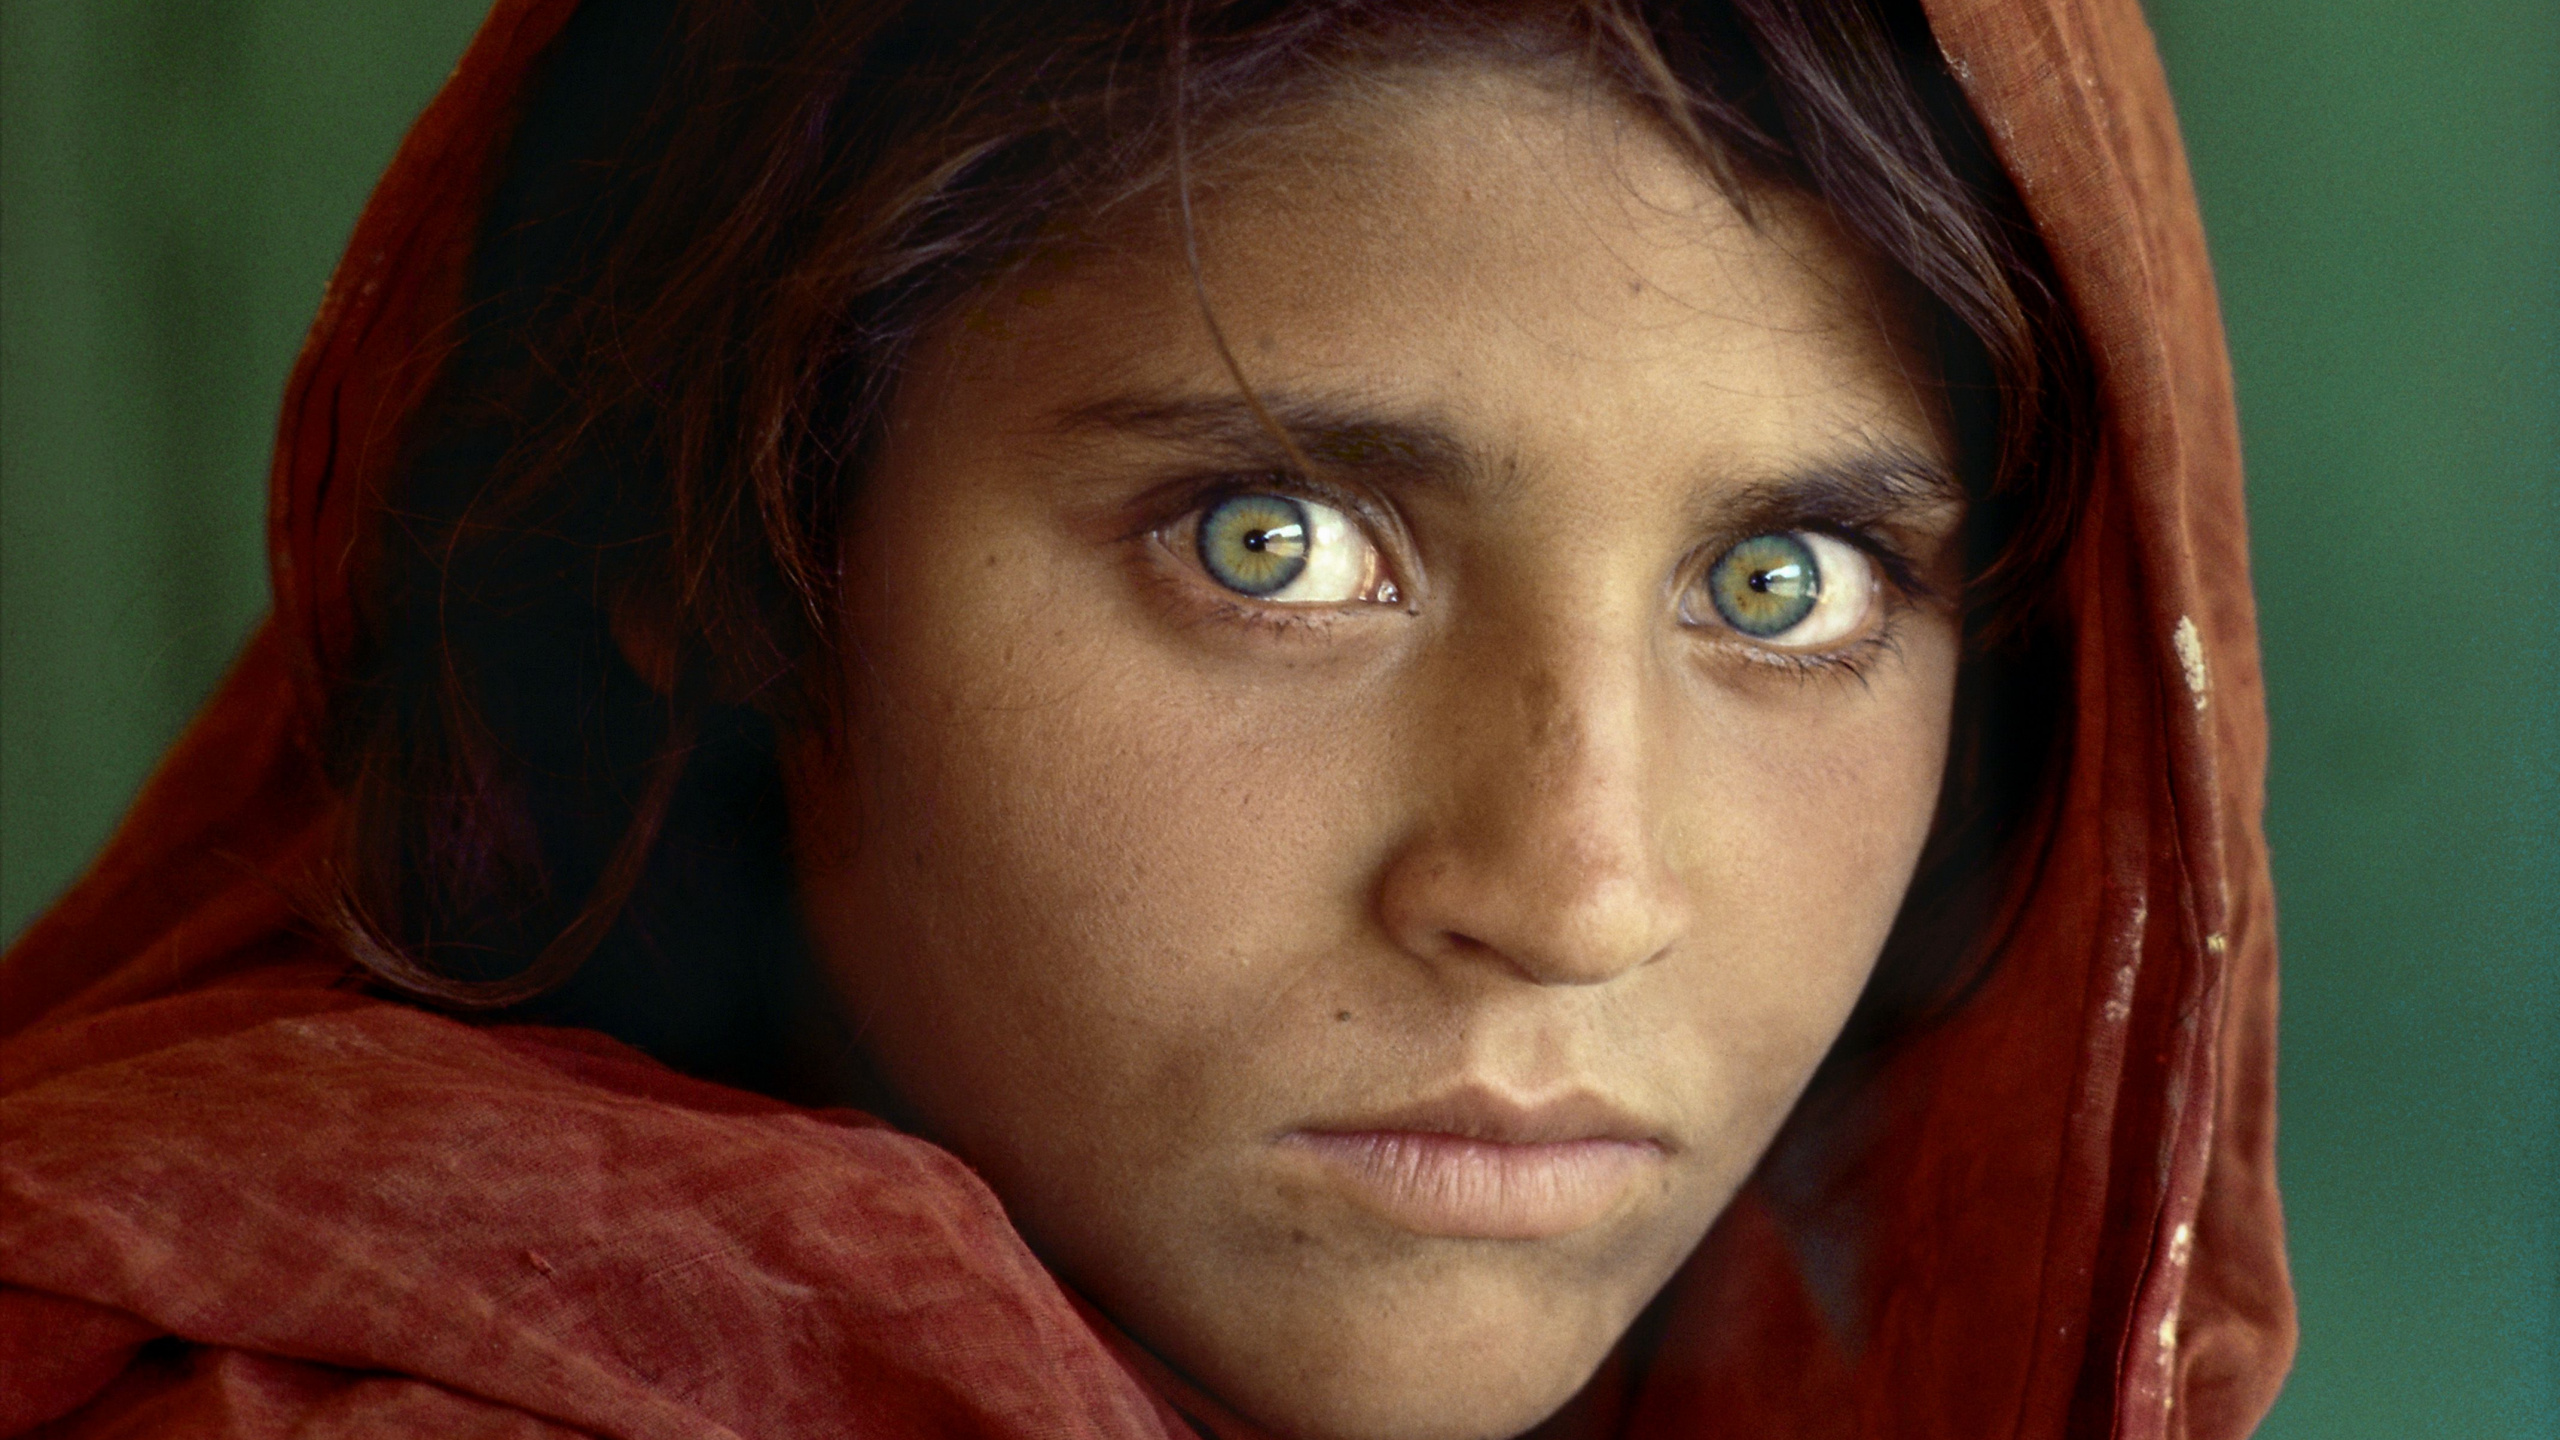 Fille Afghane, Afghanistan, National Geographic, Face, Front. Wallpaper in 2560x1440 Resolution